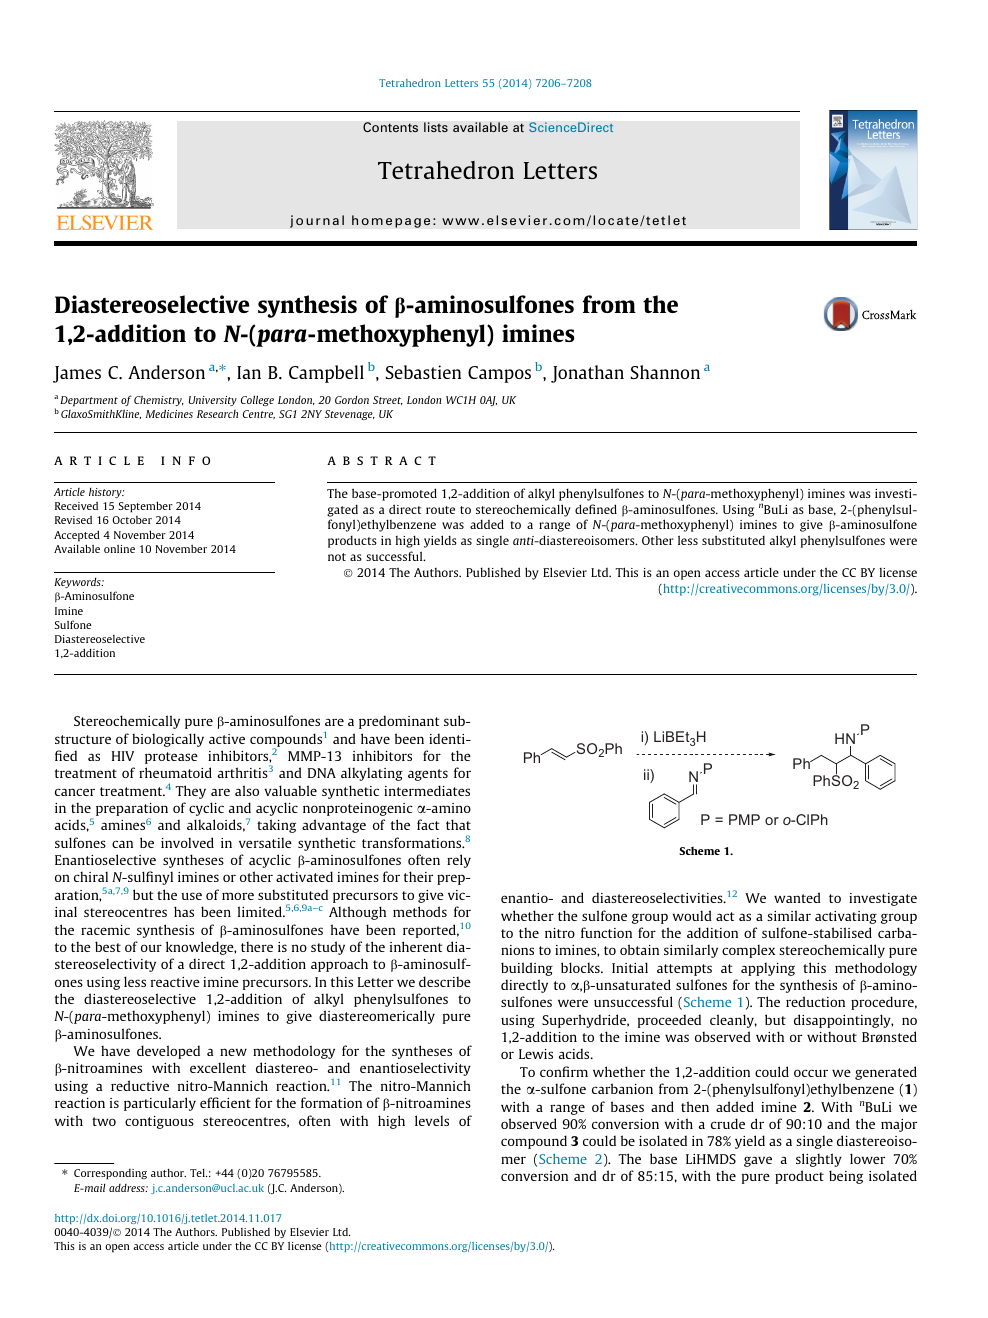 Diastereoselective Synthesis Of B Aminosulfones From The 1 2 Addition To N Para Methoxyphenyl Imines Topic Of Research Paper In Chemical Sciences Download Scholarly Article Pdf And Read For Free On Cyberleninka Open Science Hub